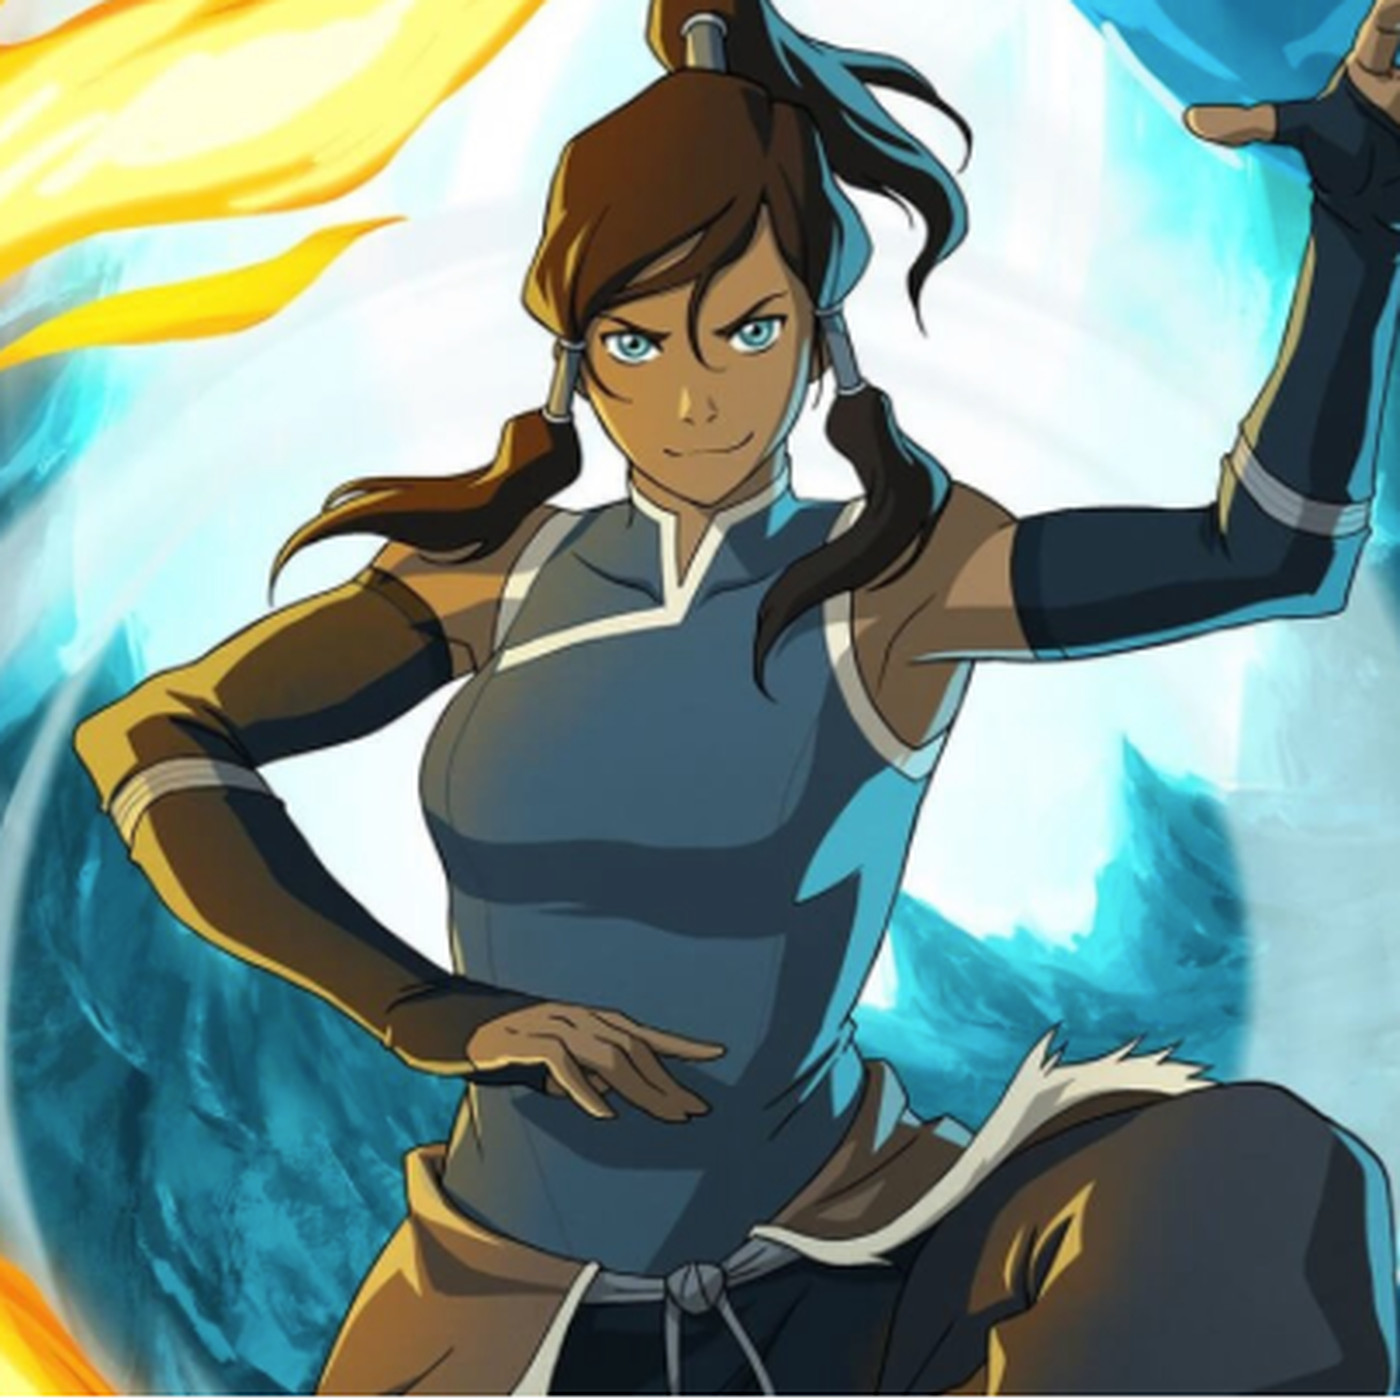 Avatar Sequel The Legend Of Korra Will Be Available To Stream On Netflix In August The Verge